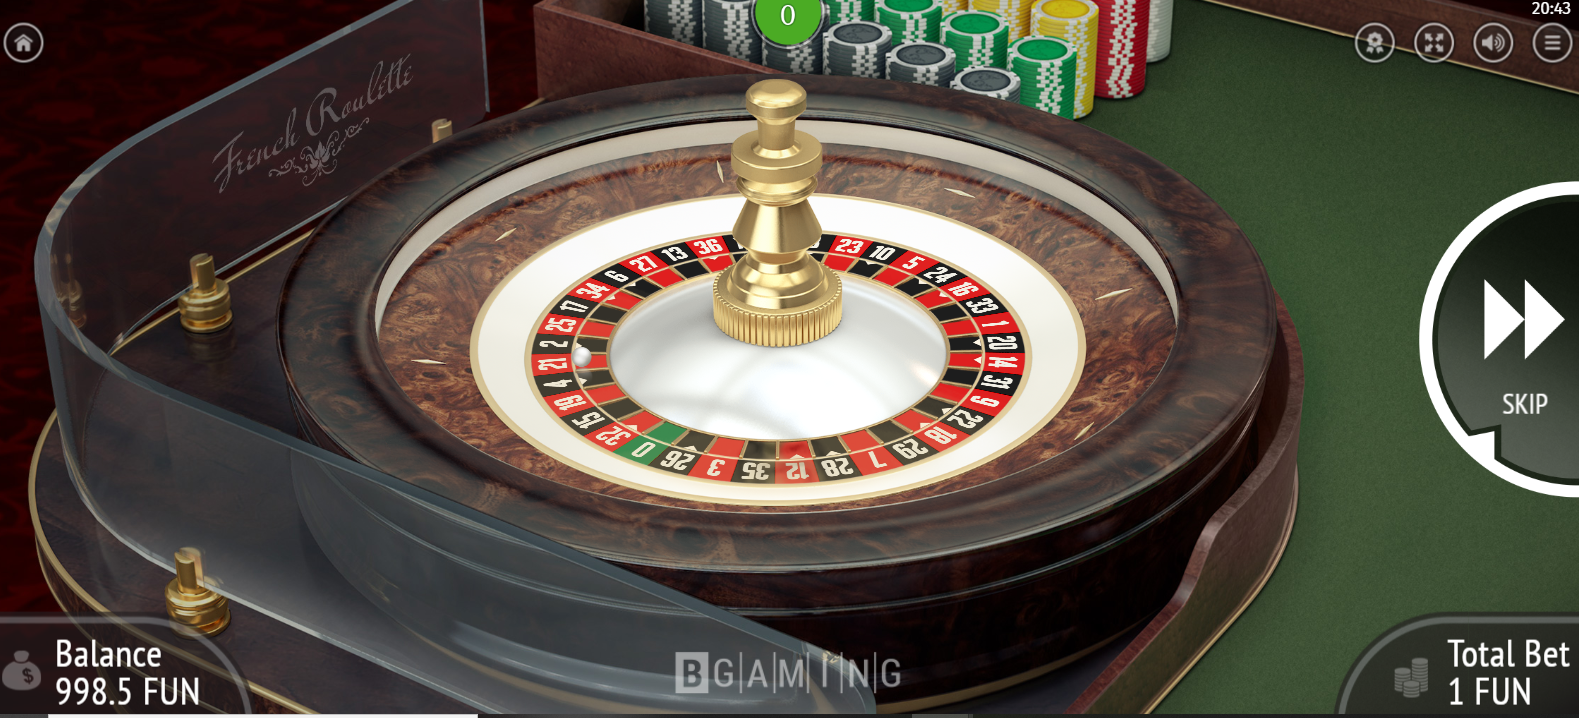 BGaming French Roulette Online Casino Wheel Layout